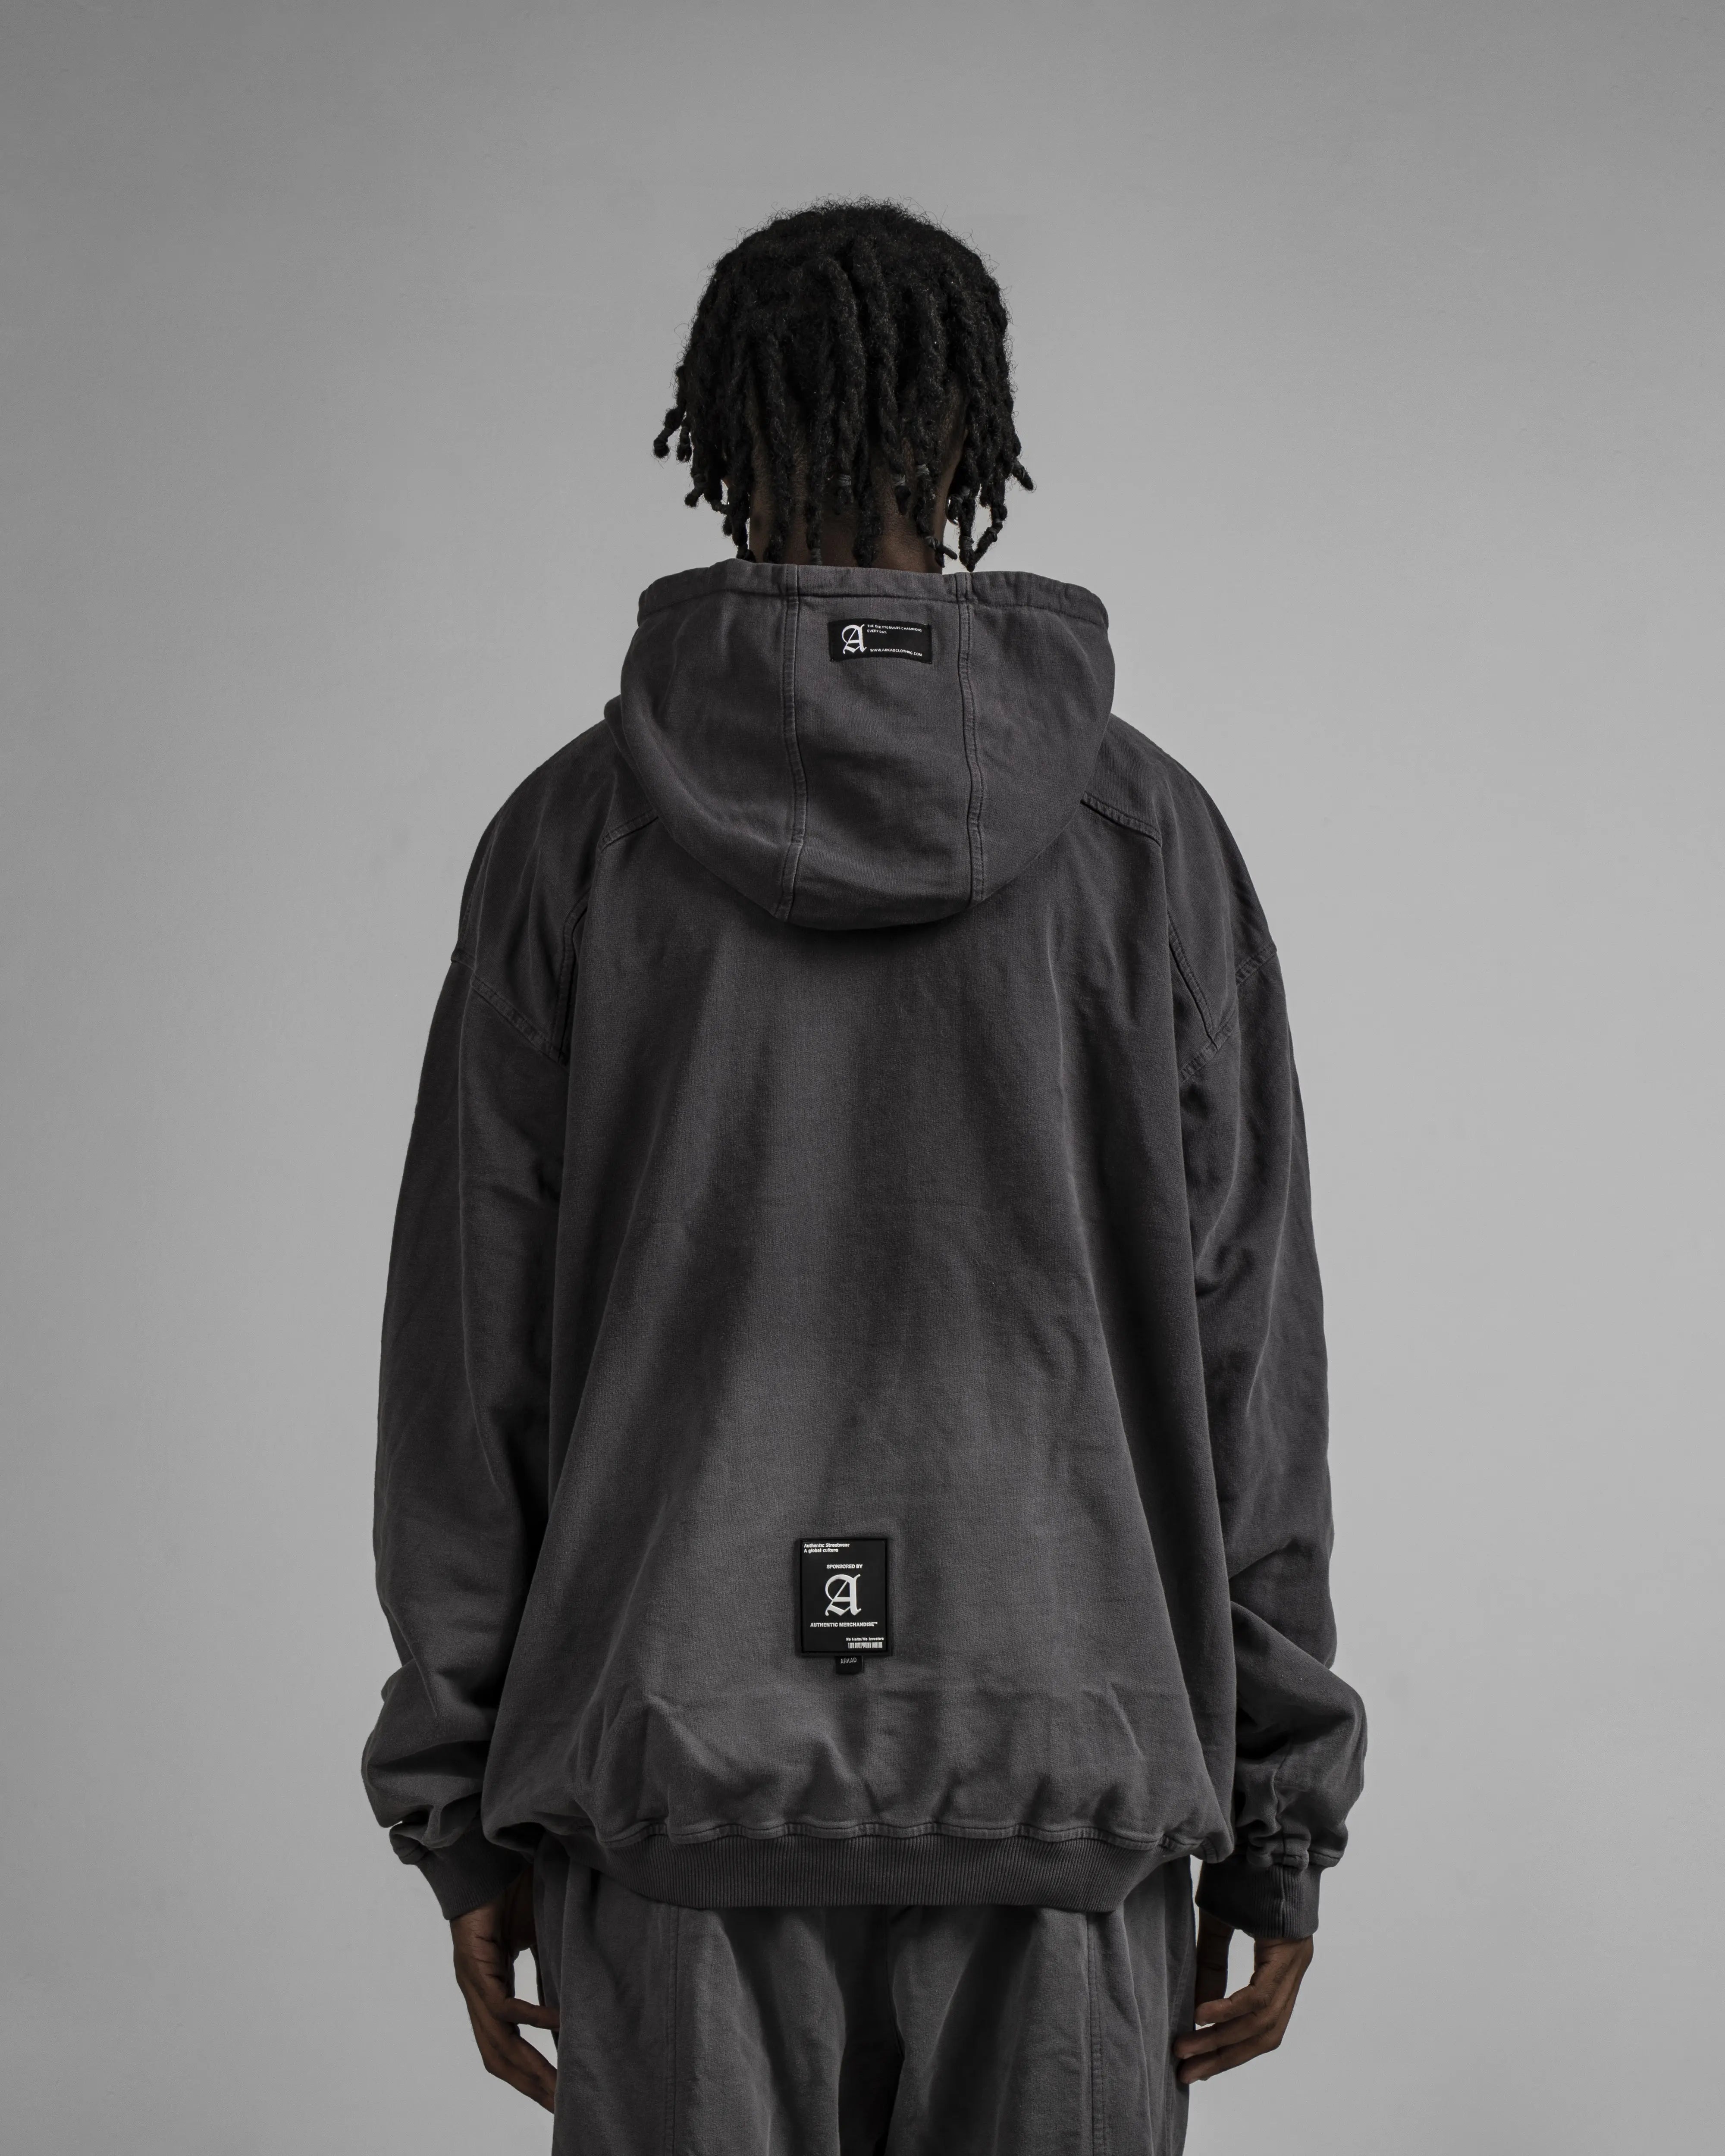 Hoodie Gris Oscuro Washed